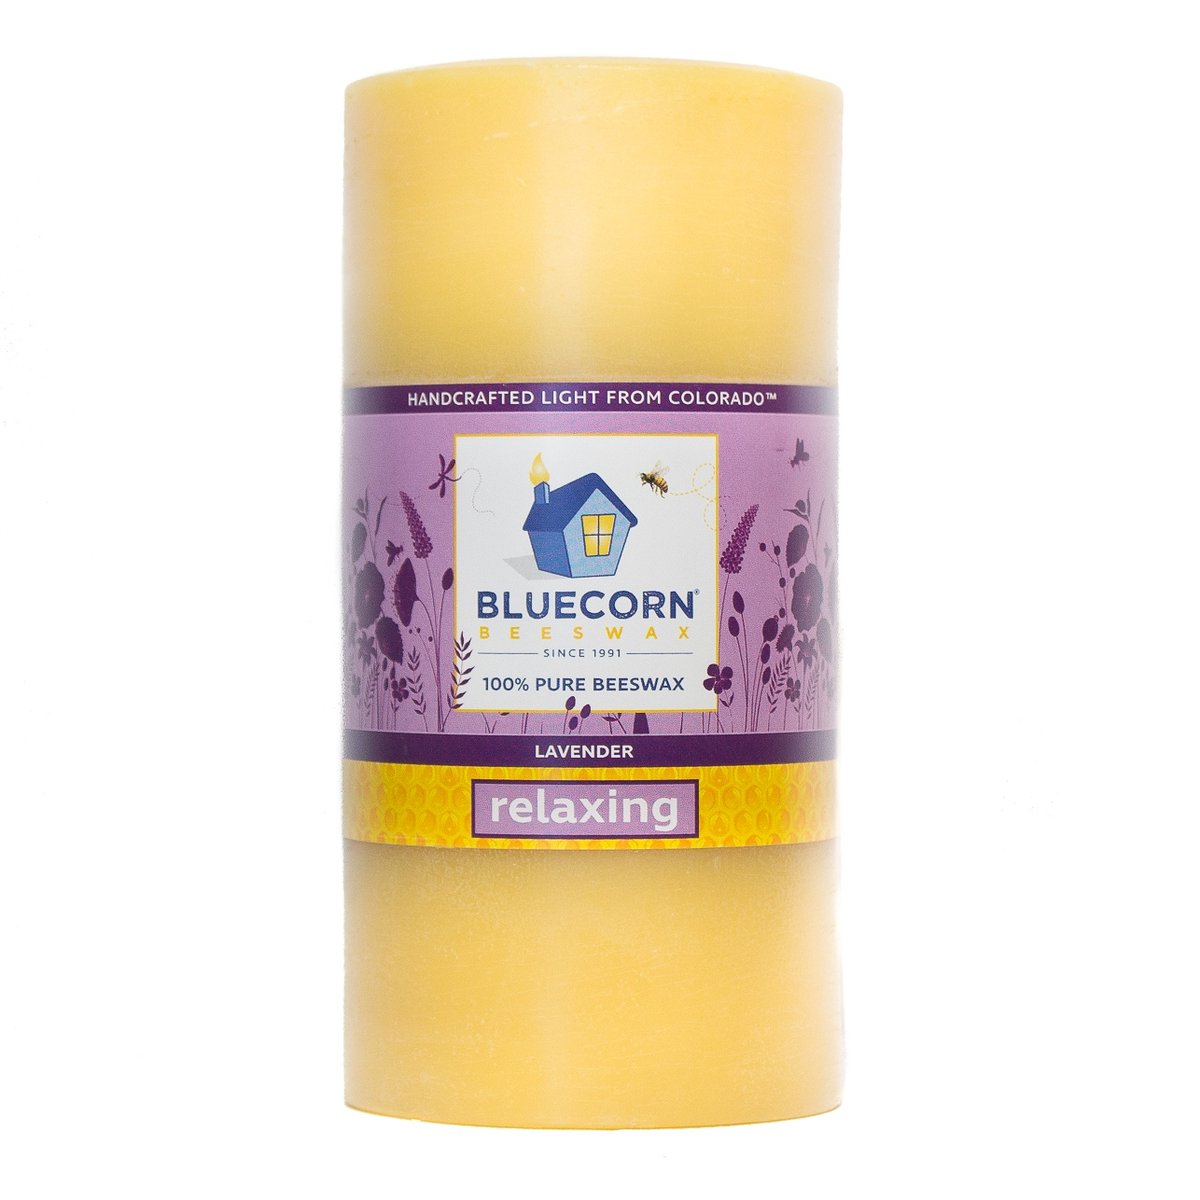 Pure, raw beeswax has a alchemical aroma all its own -- sweet like the flowers it came from. But for those who like a little added fragrance, we offer an Aromatherapy line scented with pure essential oils! #phthalatefreecandles #essentialoils #beeswaxcandles #safescents